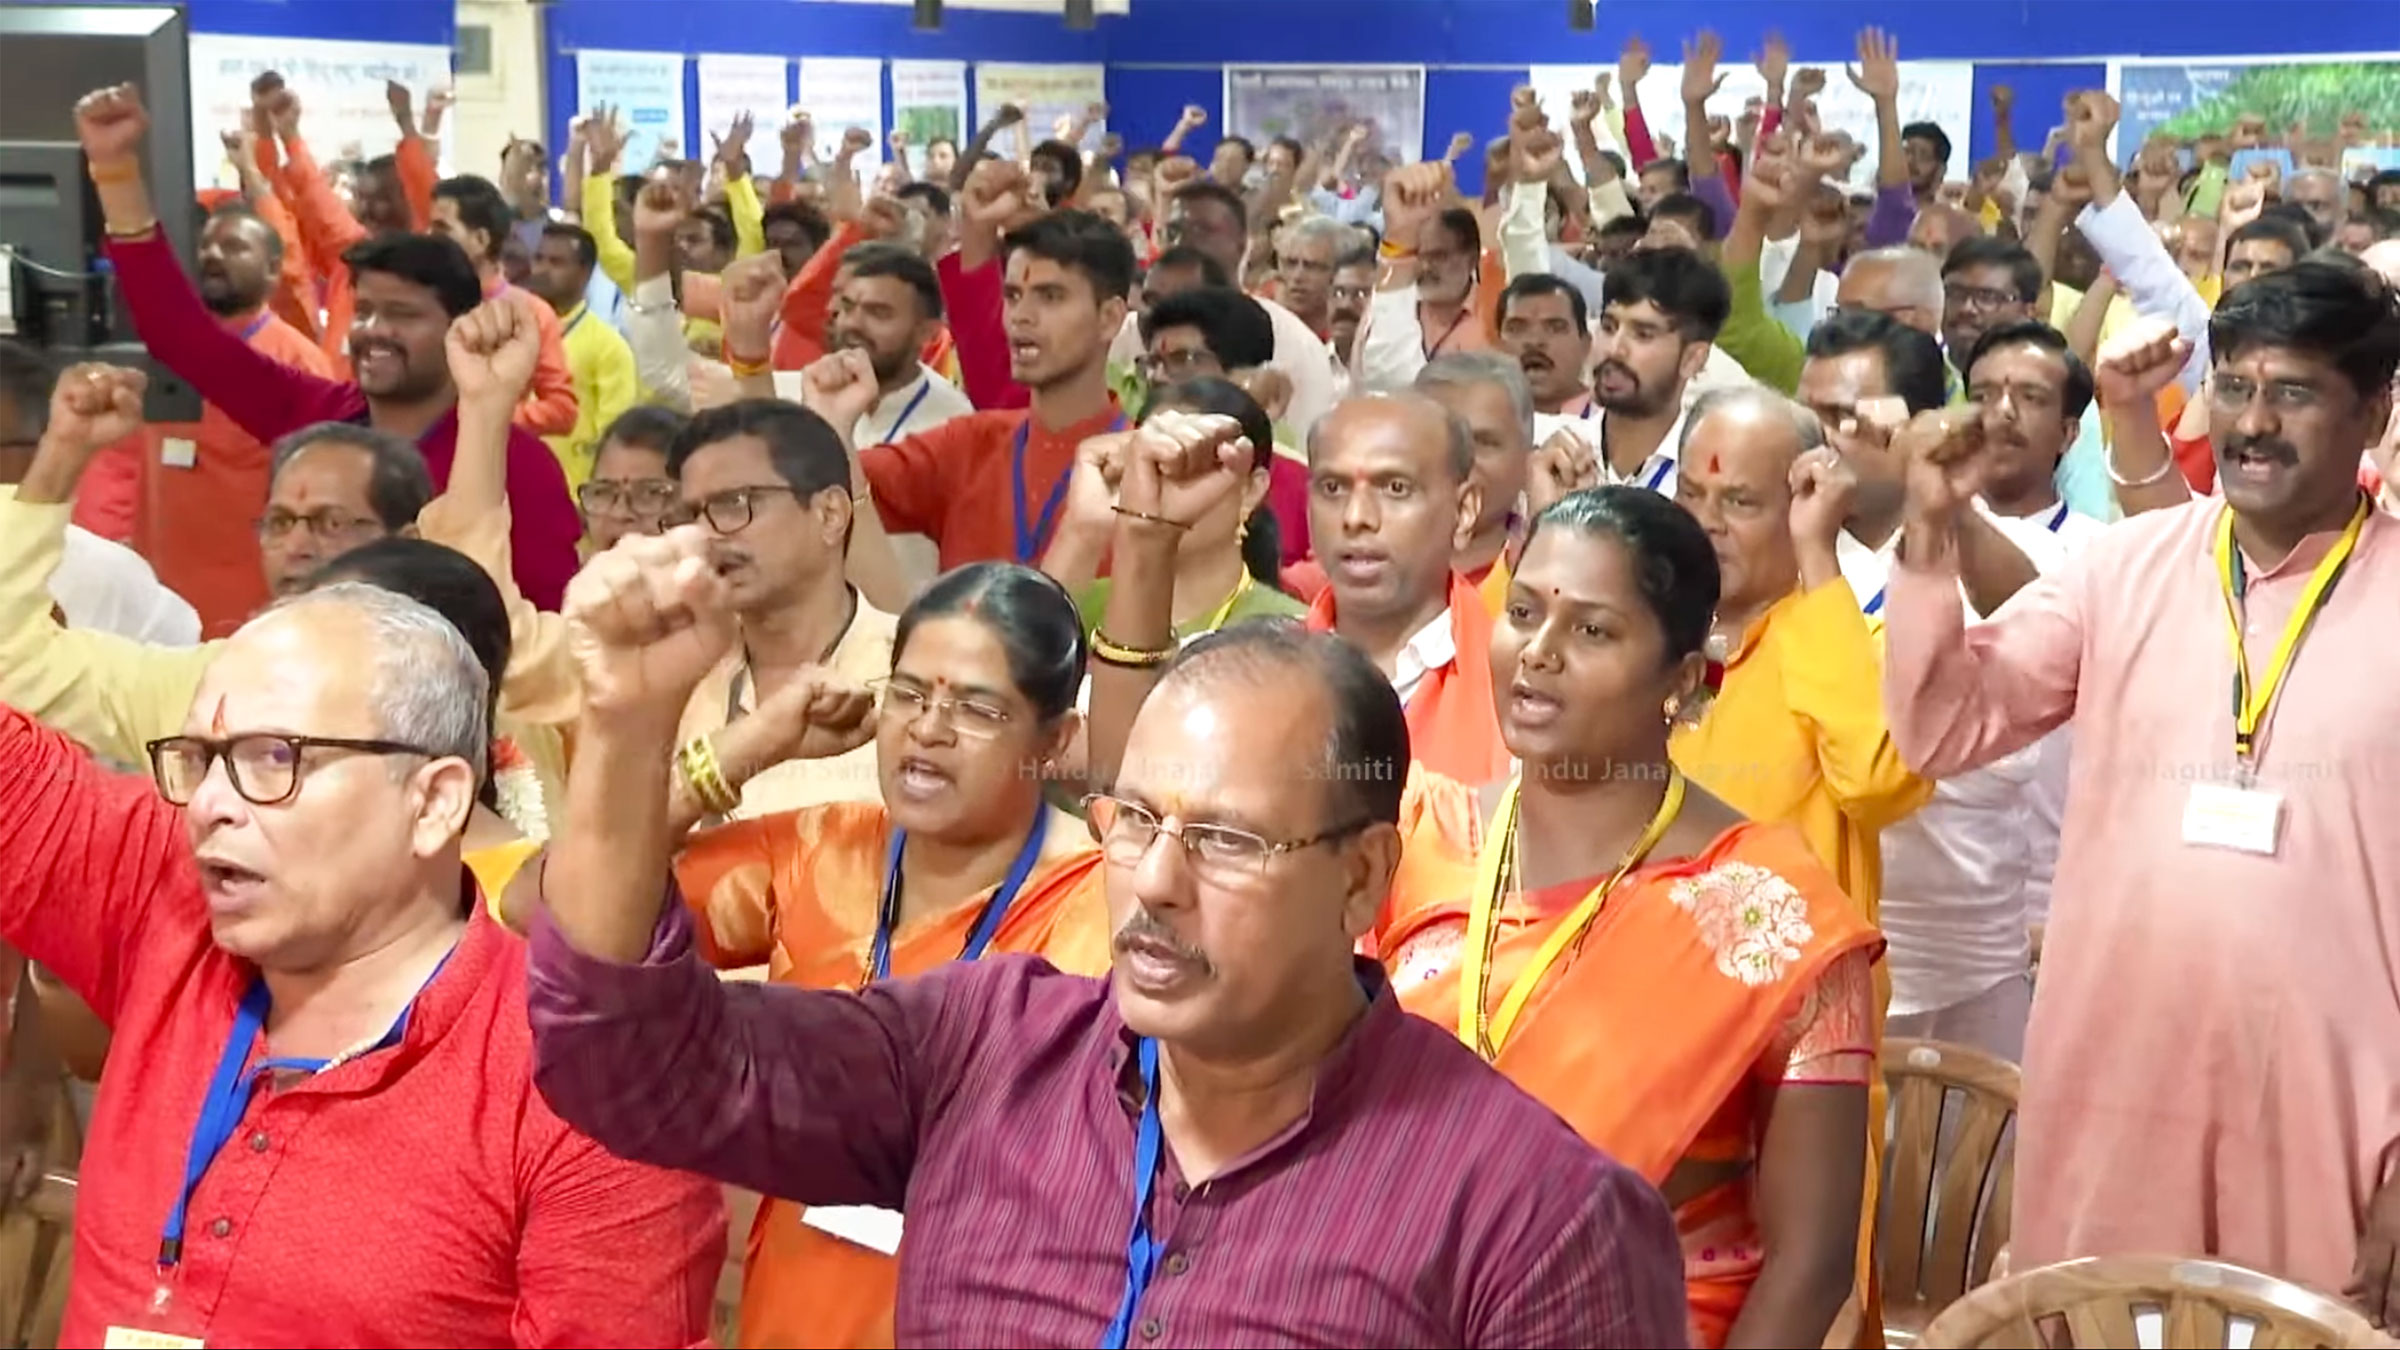 Devout Hindus and seekers enthusiastically hailing 'Bharat Mata' and showing their eagerness to participate in the mission of establishing the ‘Hindu Rashtra’.